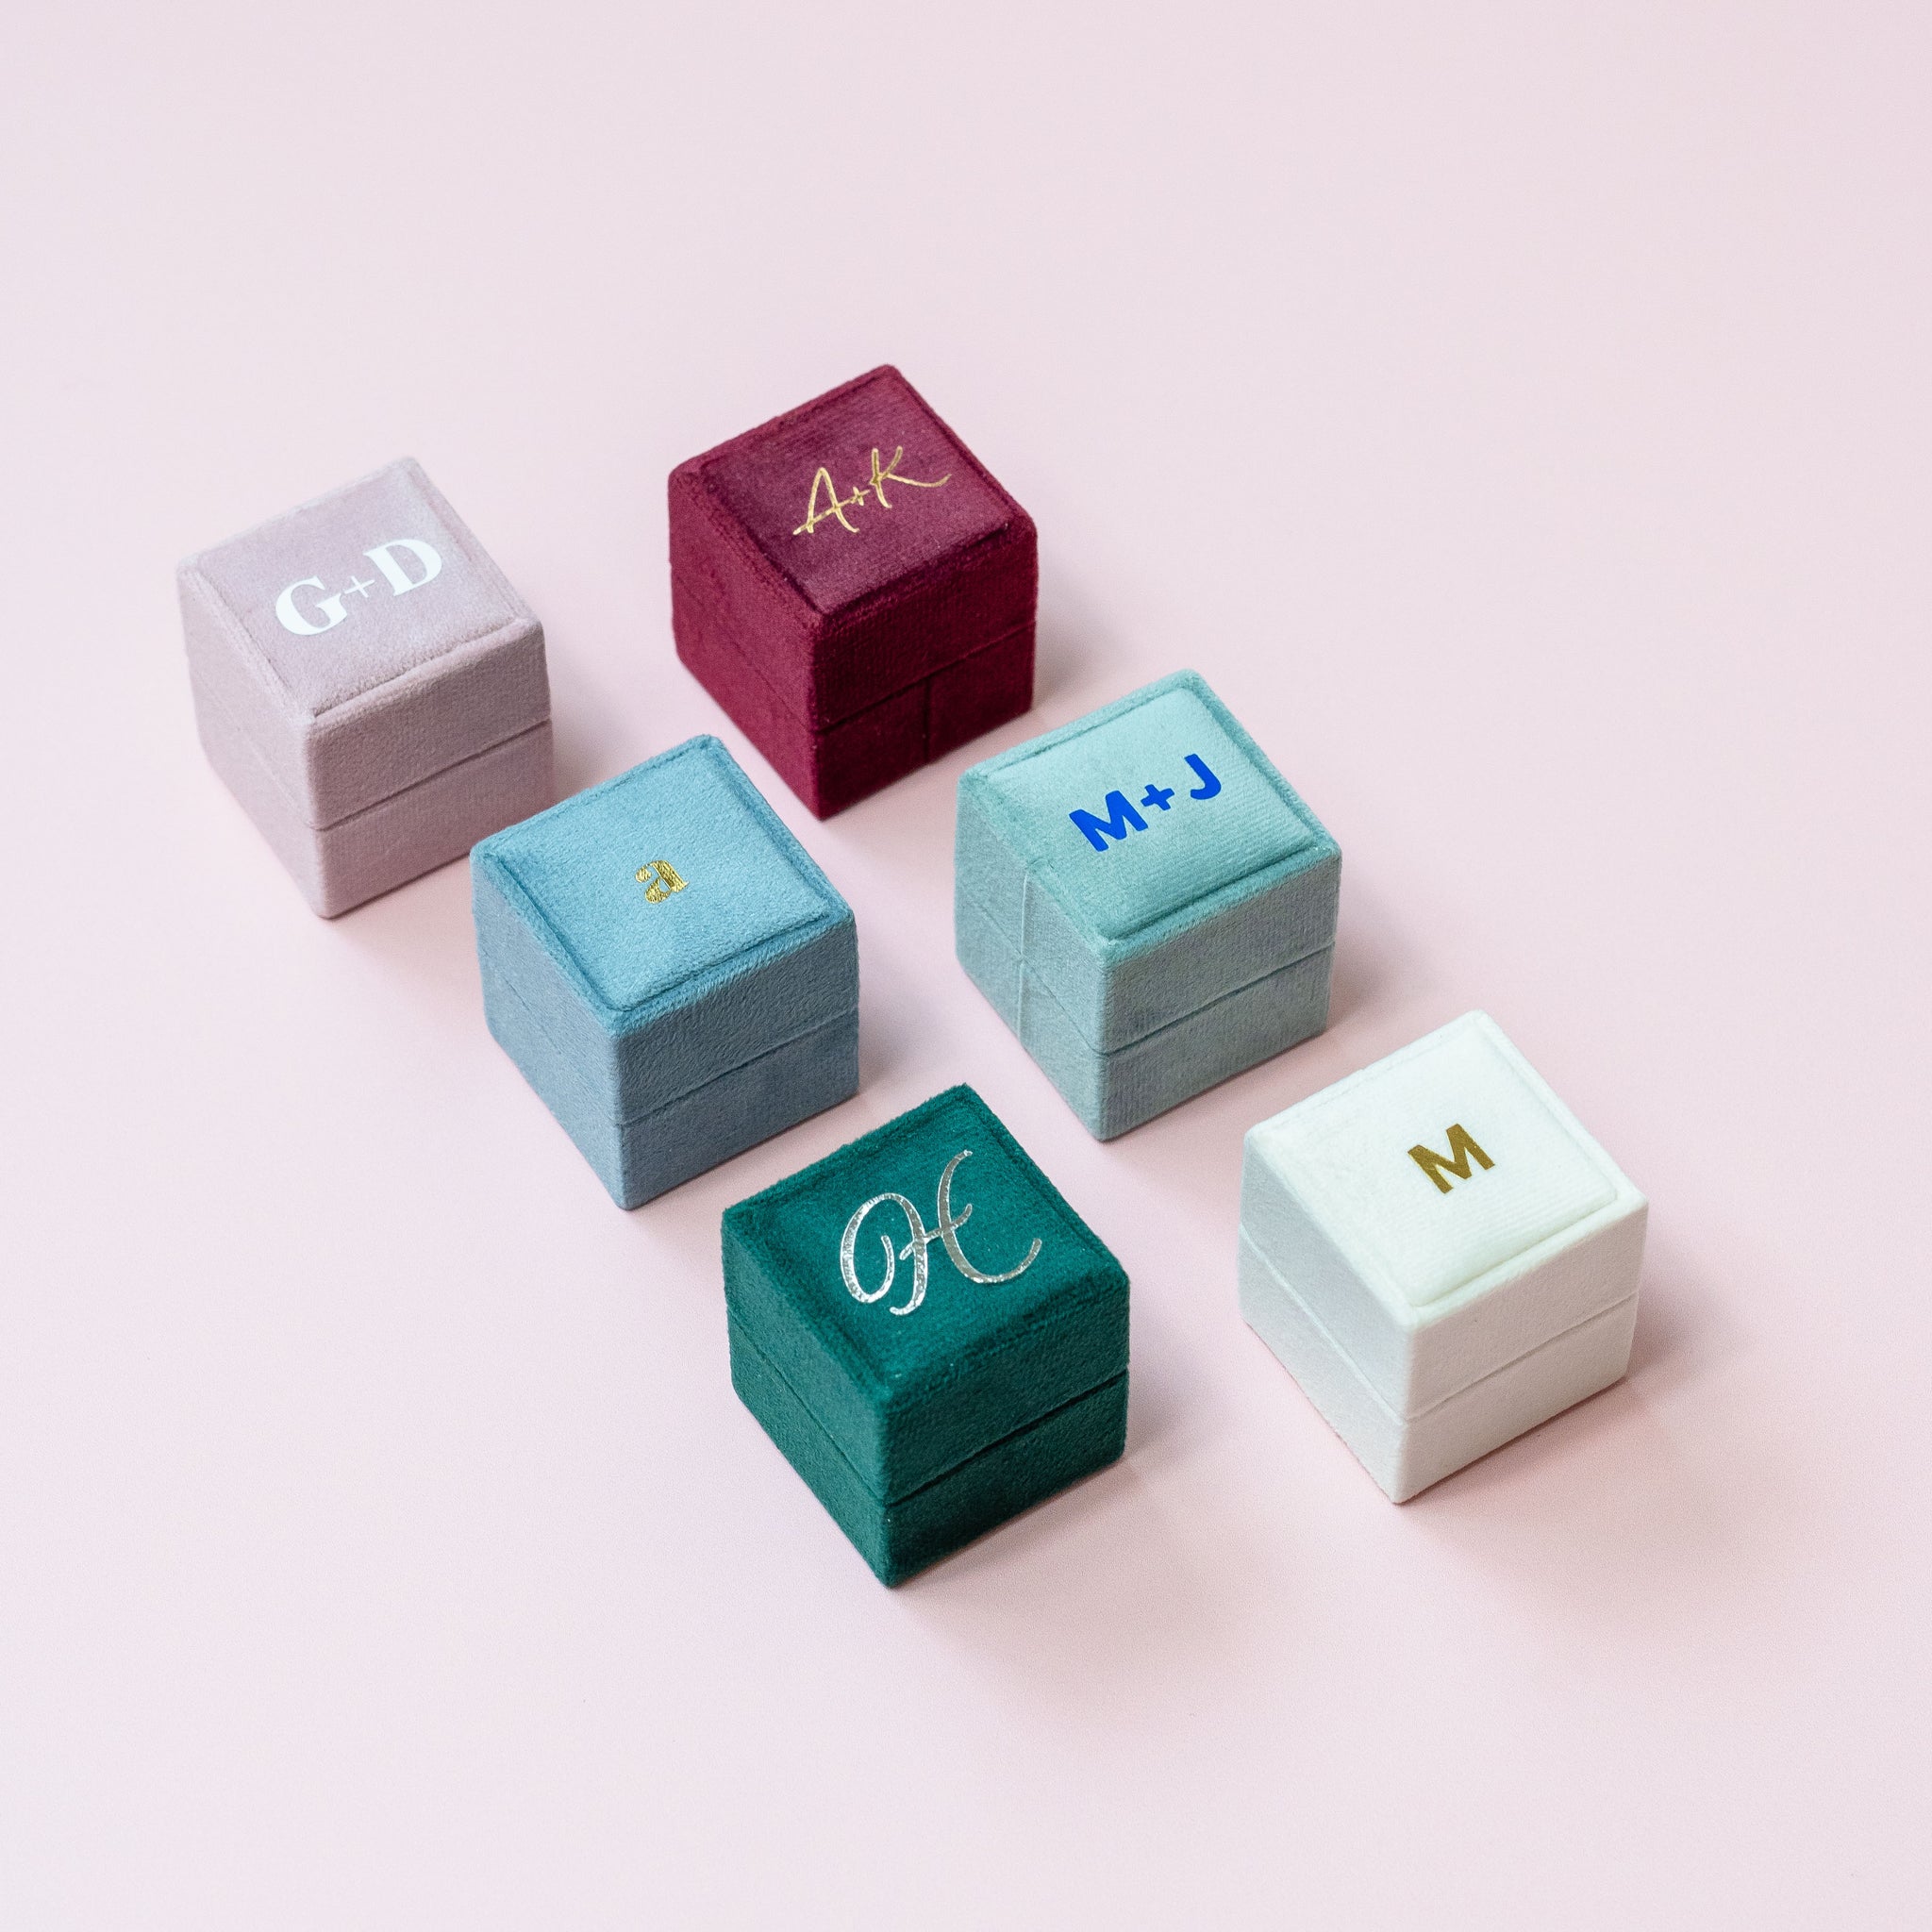 Velvet Ring Box with personalization by Birdy Grey